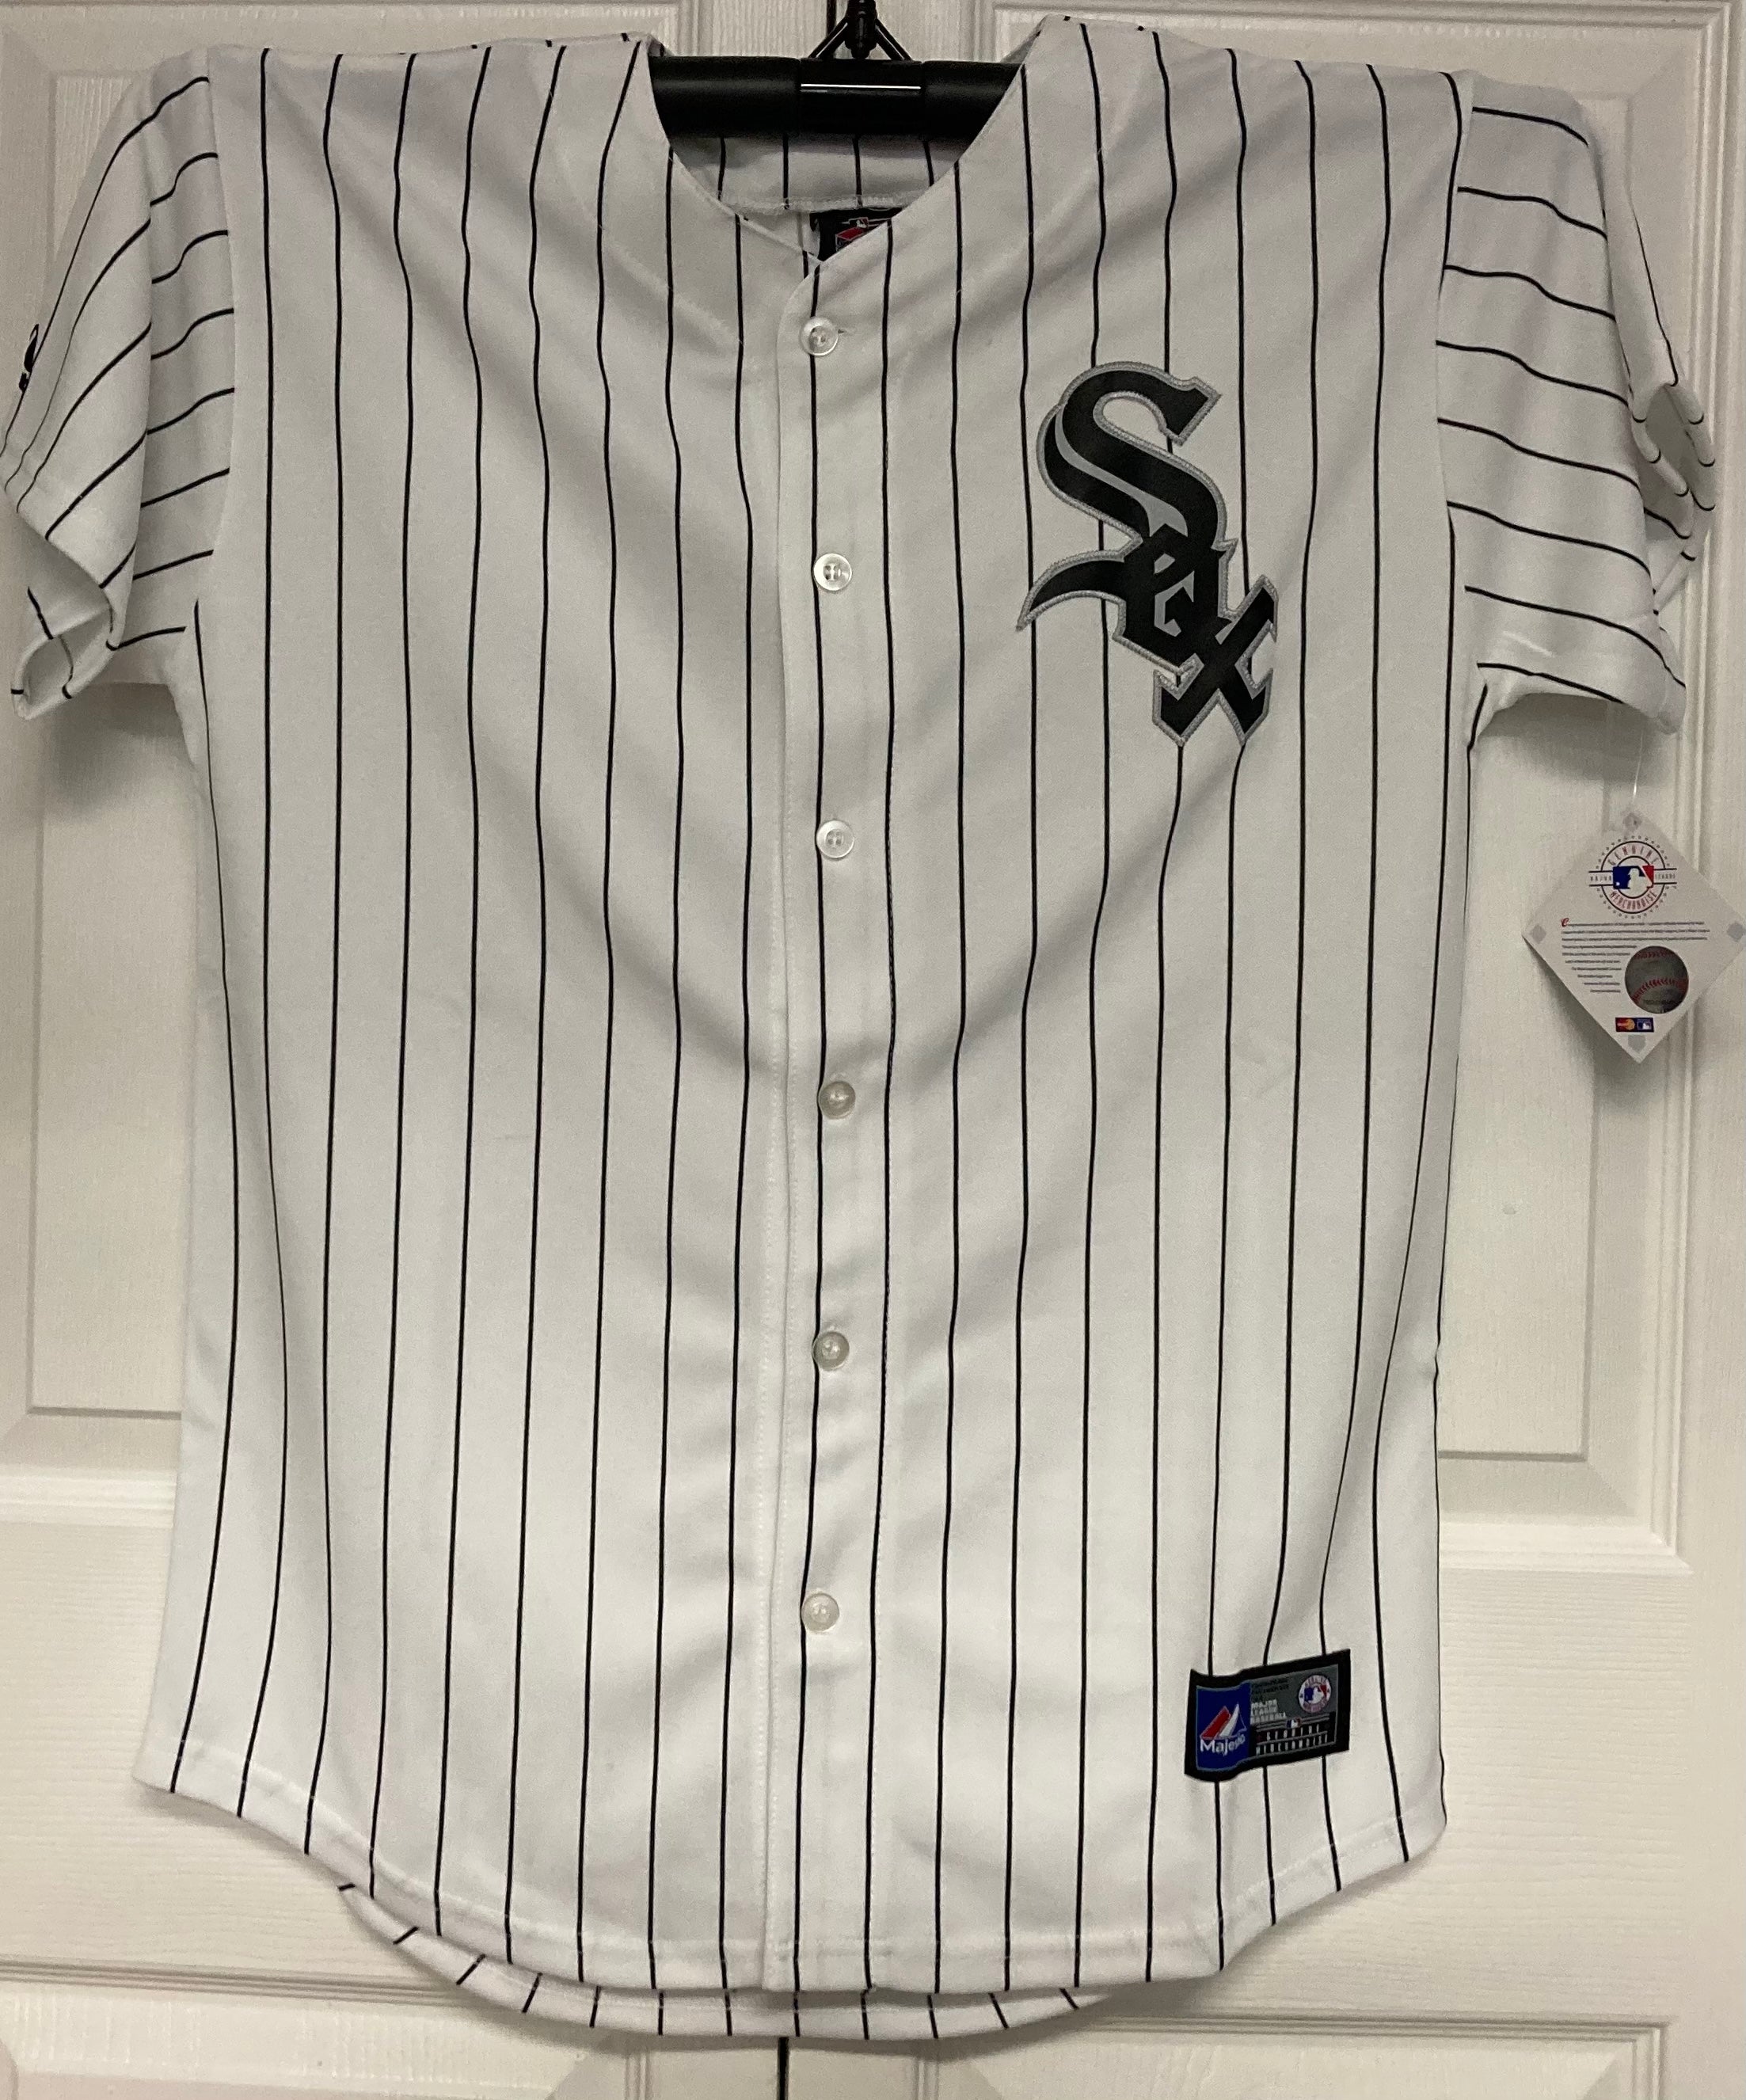 Chris SALE #49 Chicago White Sox YOUTH Majestic MLB Baseball jersey Home  White